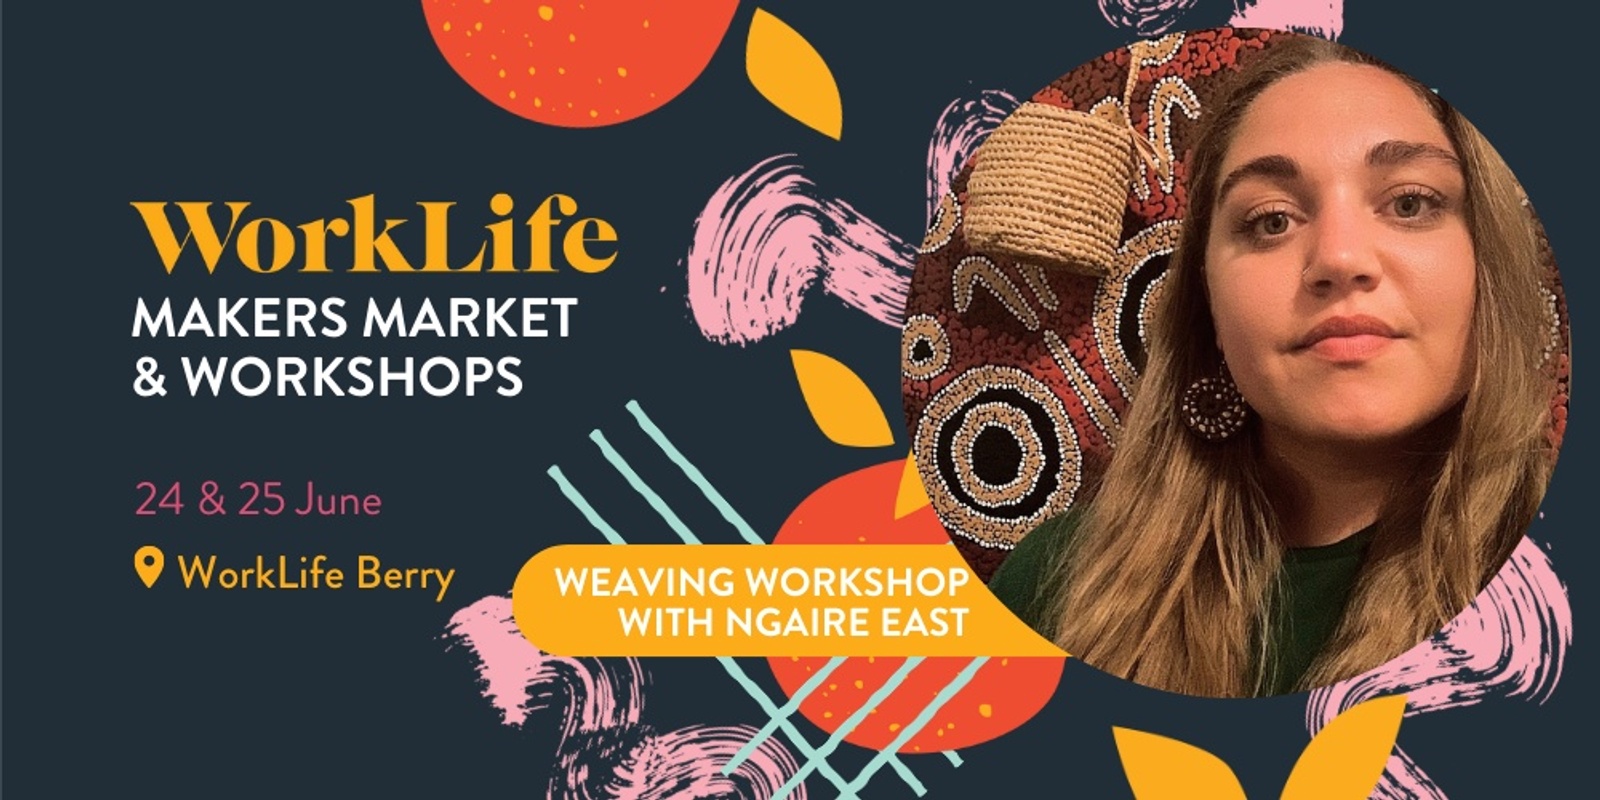 Banner image for Weaving Workshop with By The Bila for the WorkLife Makers Market & Workshops